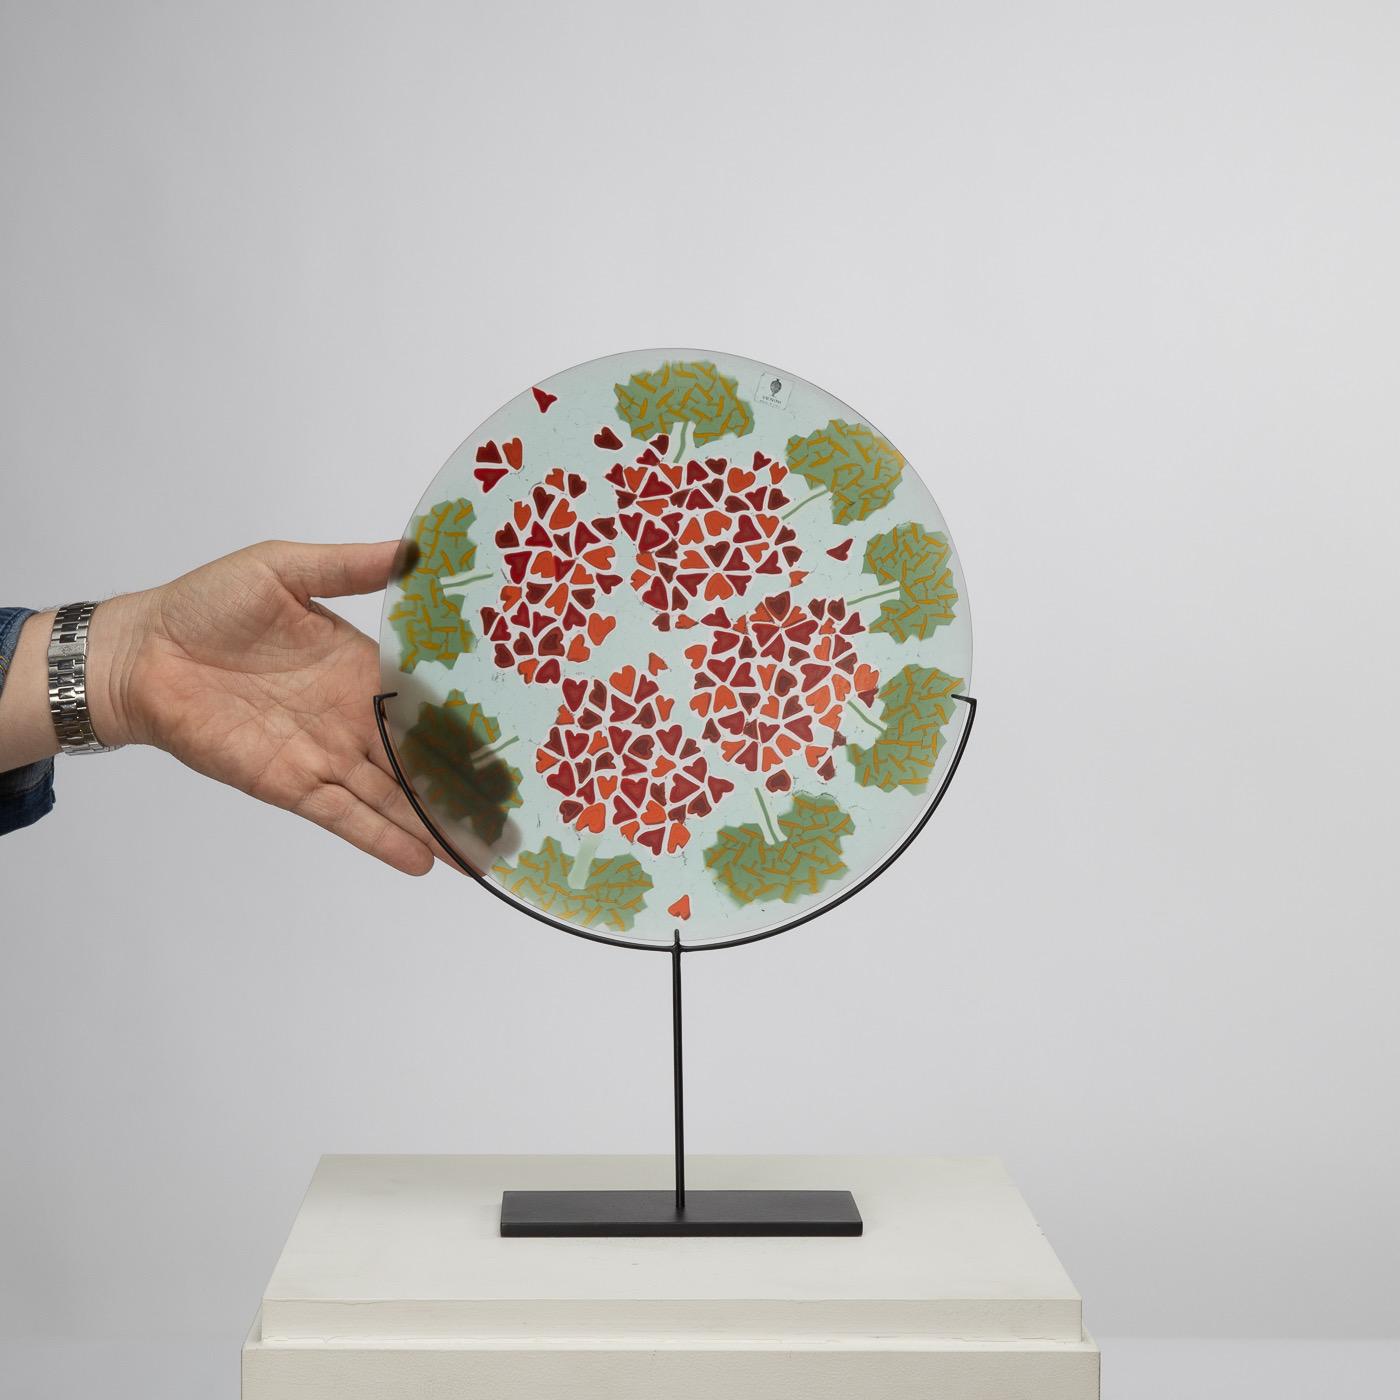 Hand welded and ground Murano glass plate with an arrangement of polychrome murrines
depicting the shape and colors of geraniums. 
This piece is one the 3 plates designed by Laura de Santillana of the series 